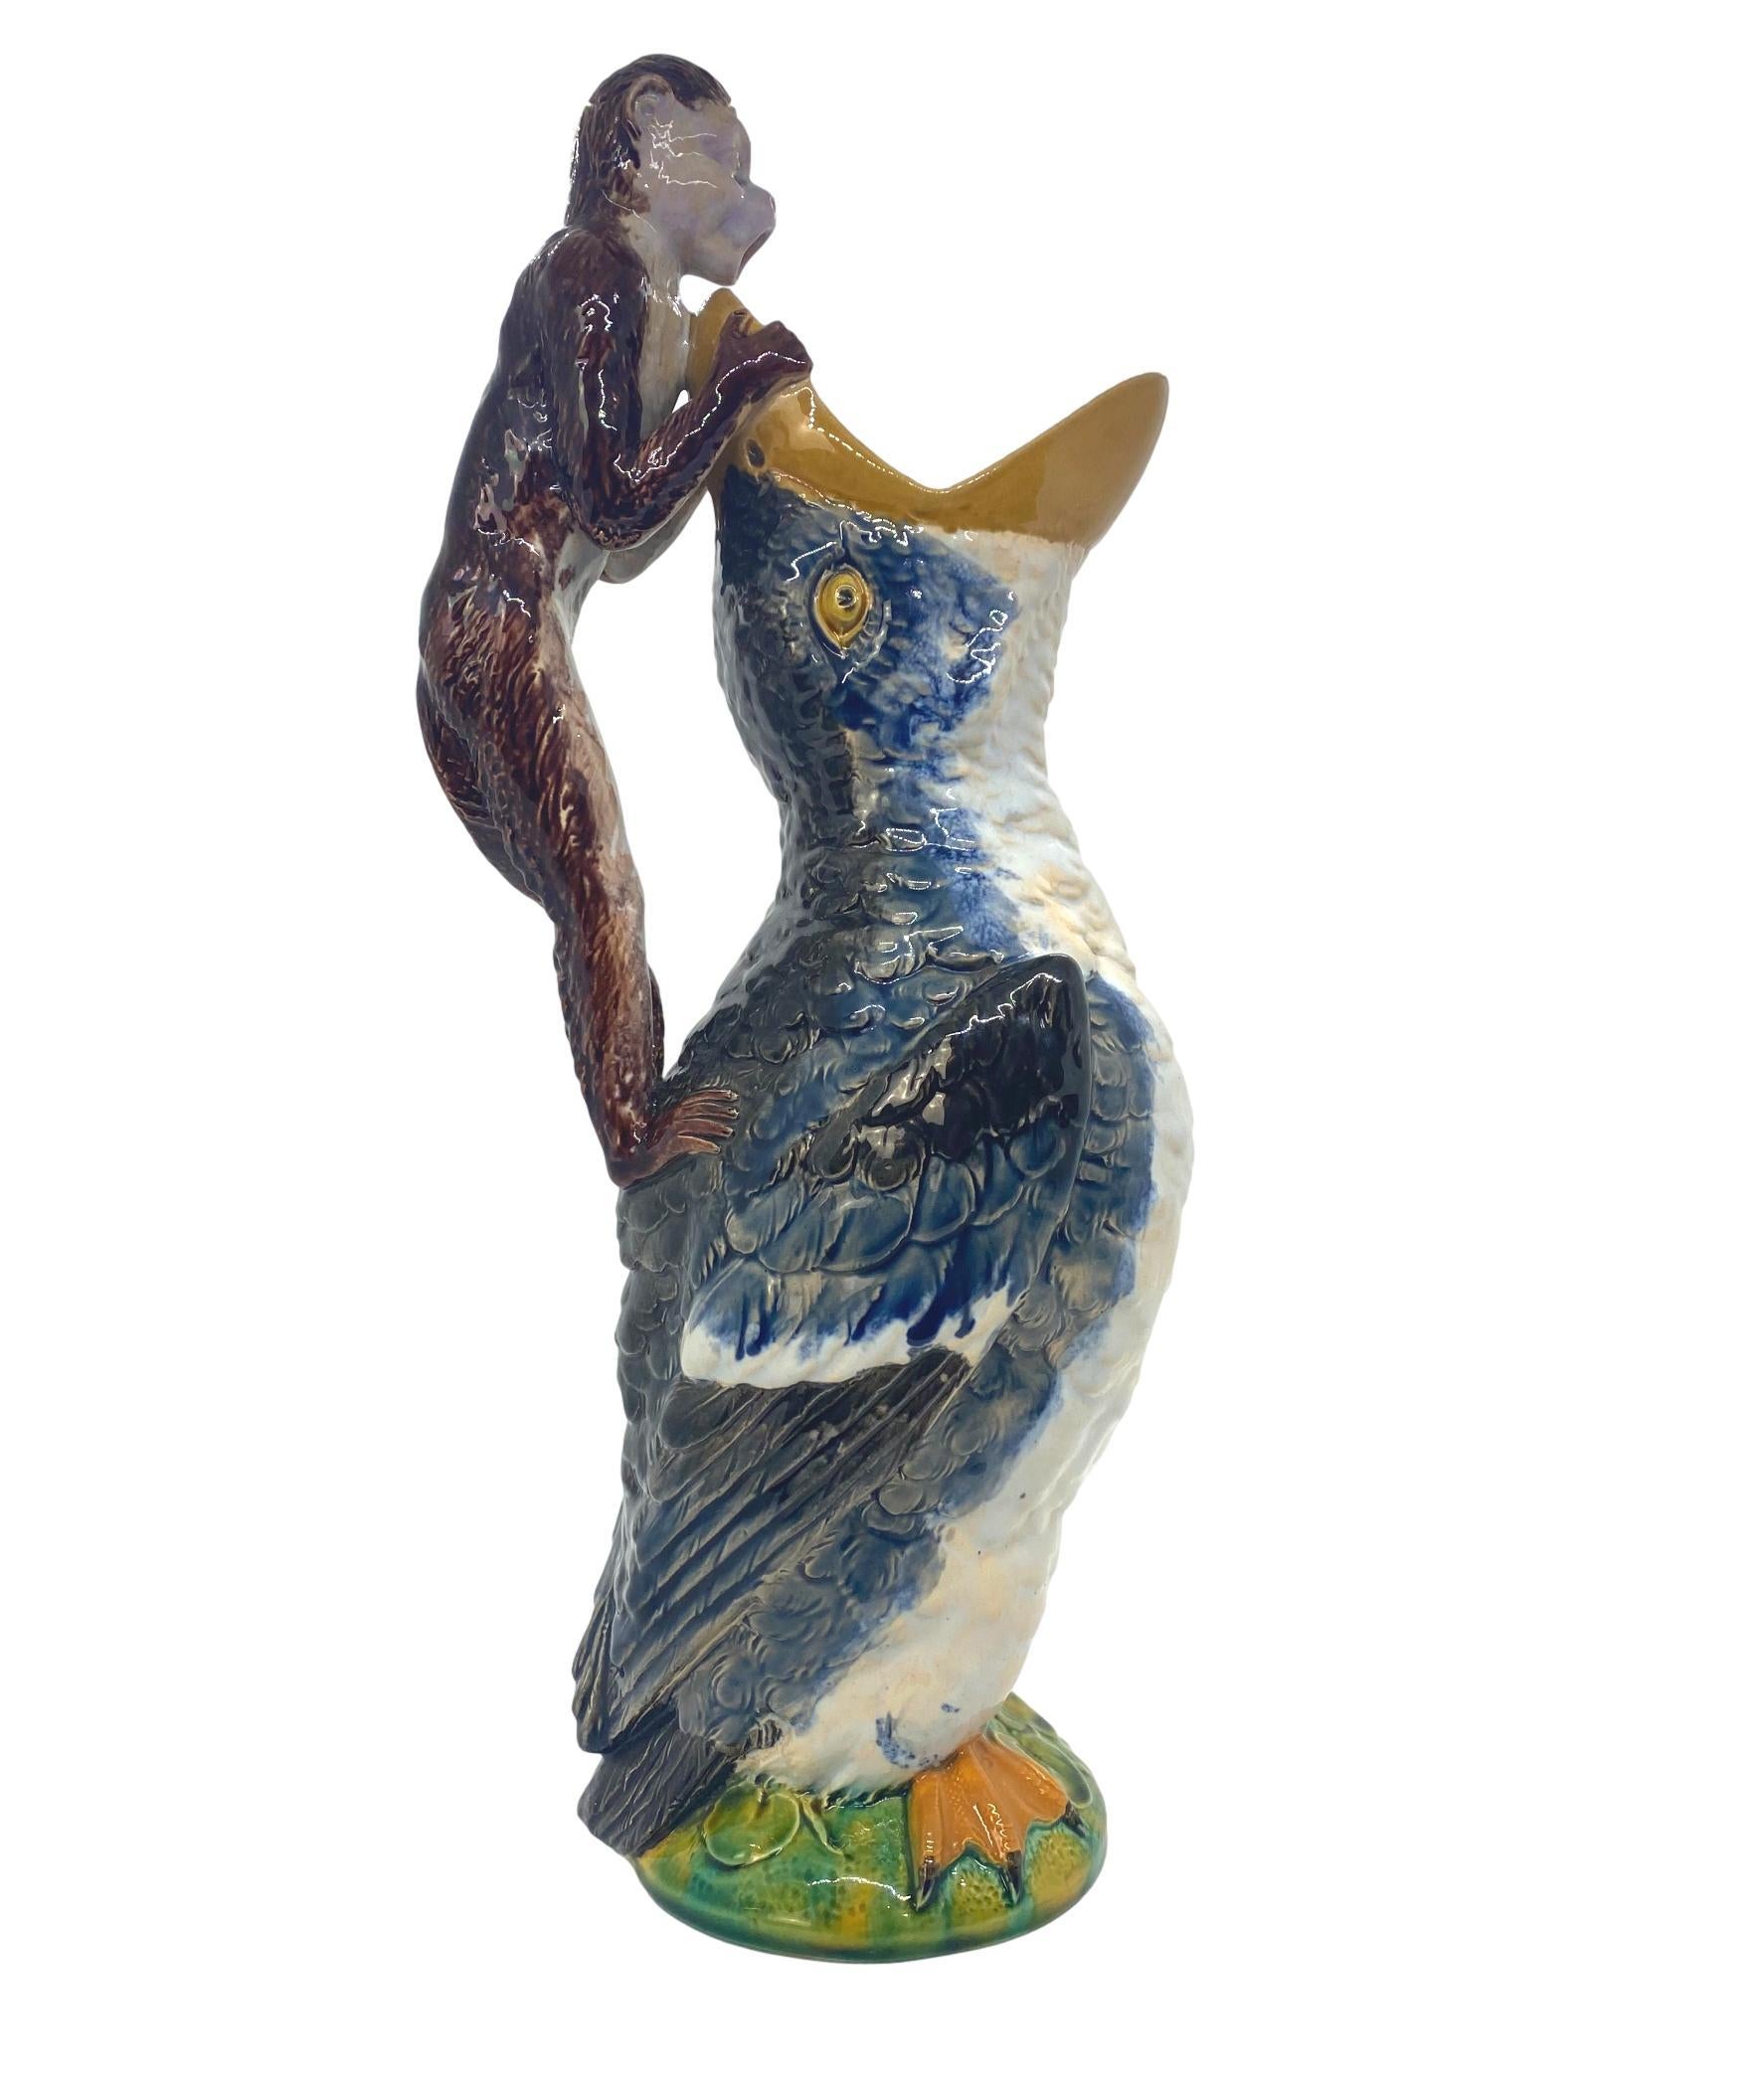 William Brownfield Majolica Monkey and Duck Pitcher, English, dated April 1876, signed with impressed maker's mark, 'BROWNFIELD.' Crisply detailed molding with beautifully vivid colored majolica glazes, this piece embodies the highest quality,